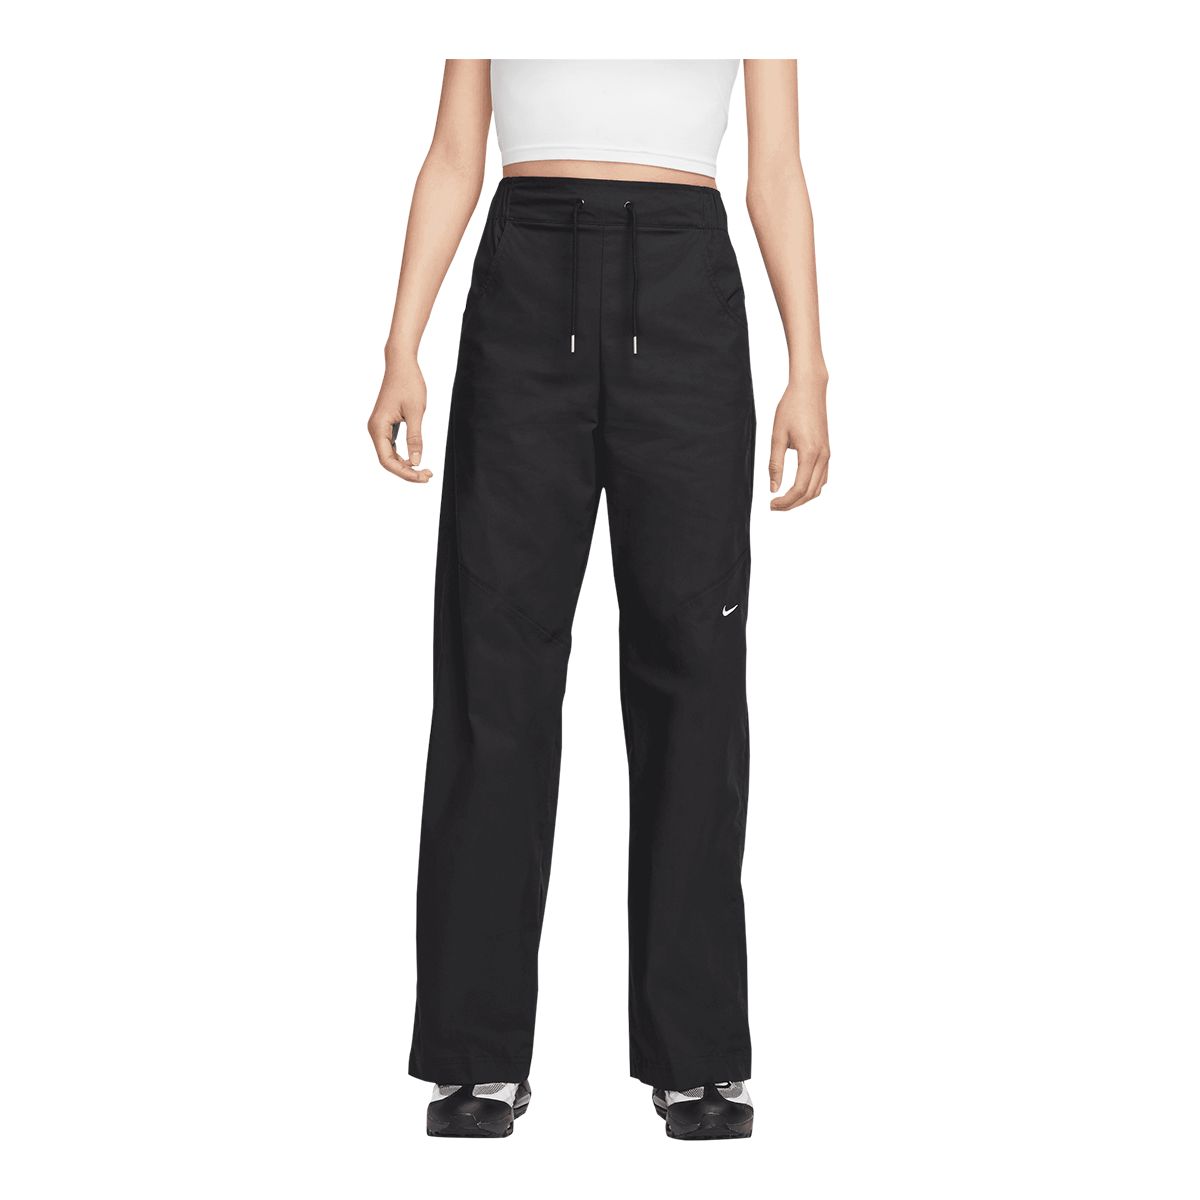 Nike Women's Essential Woven High Rise OH Pants